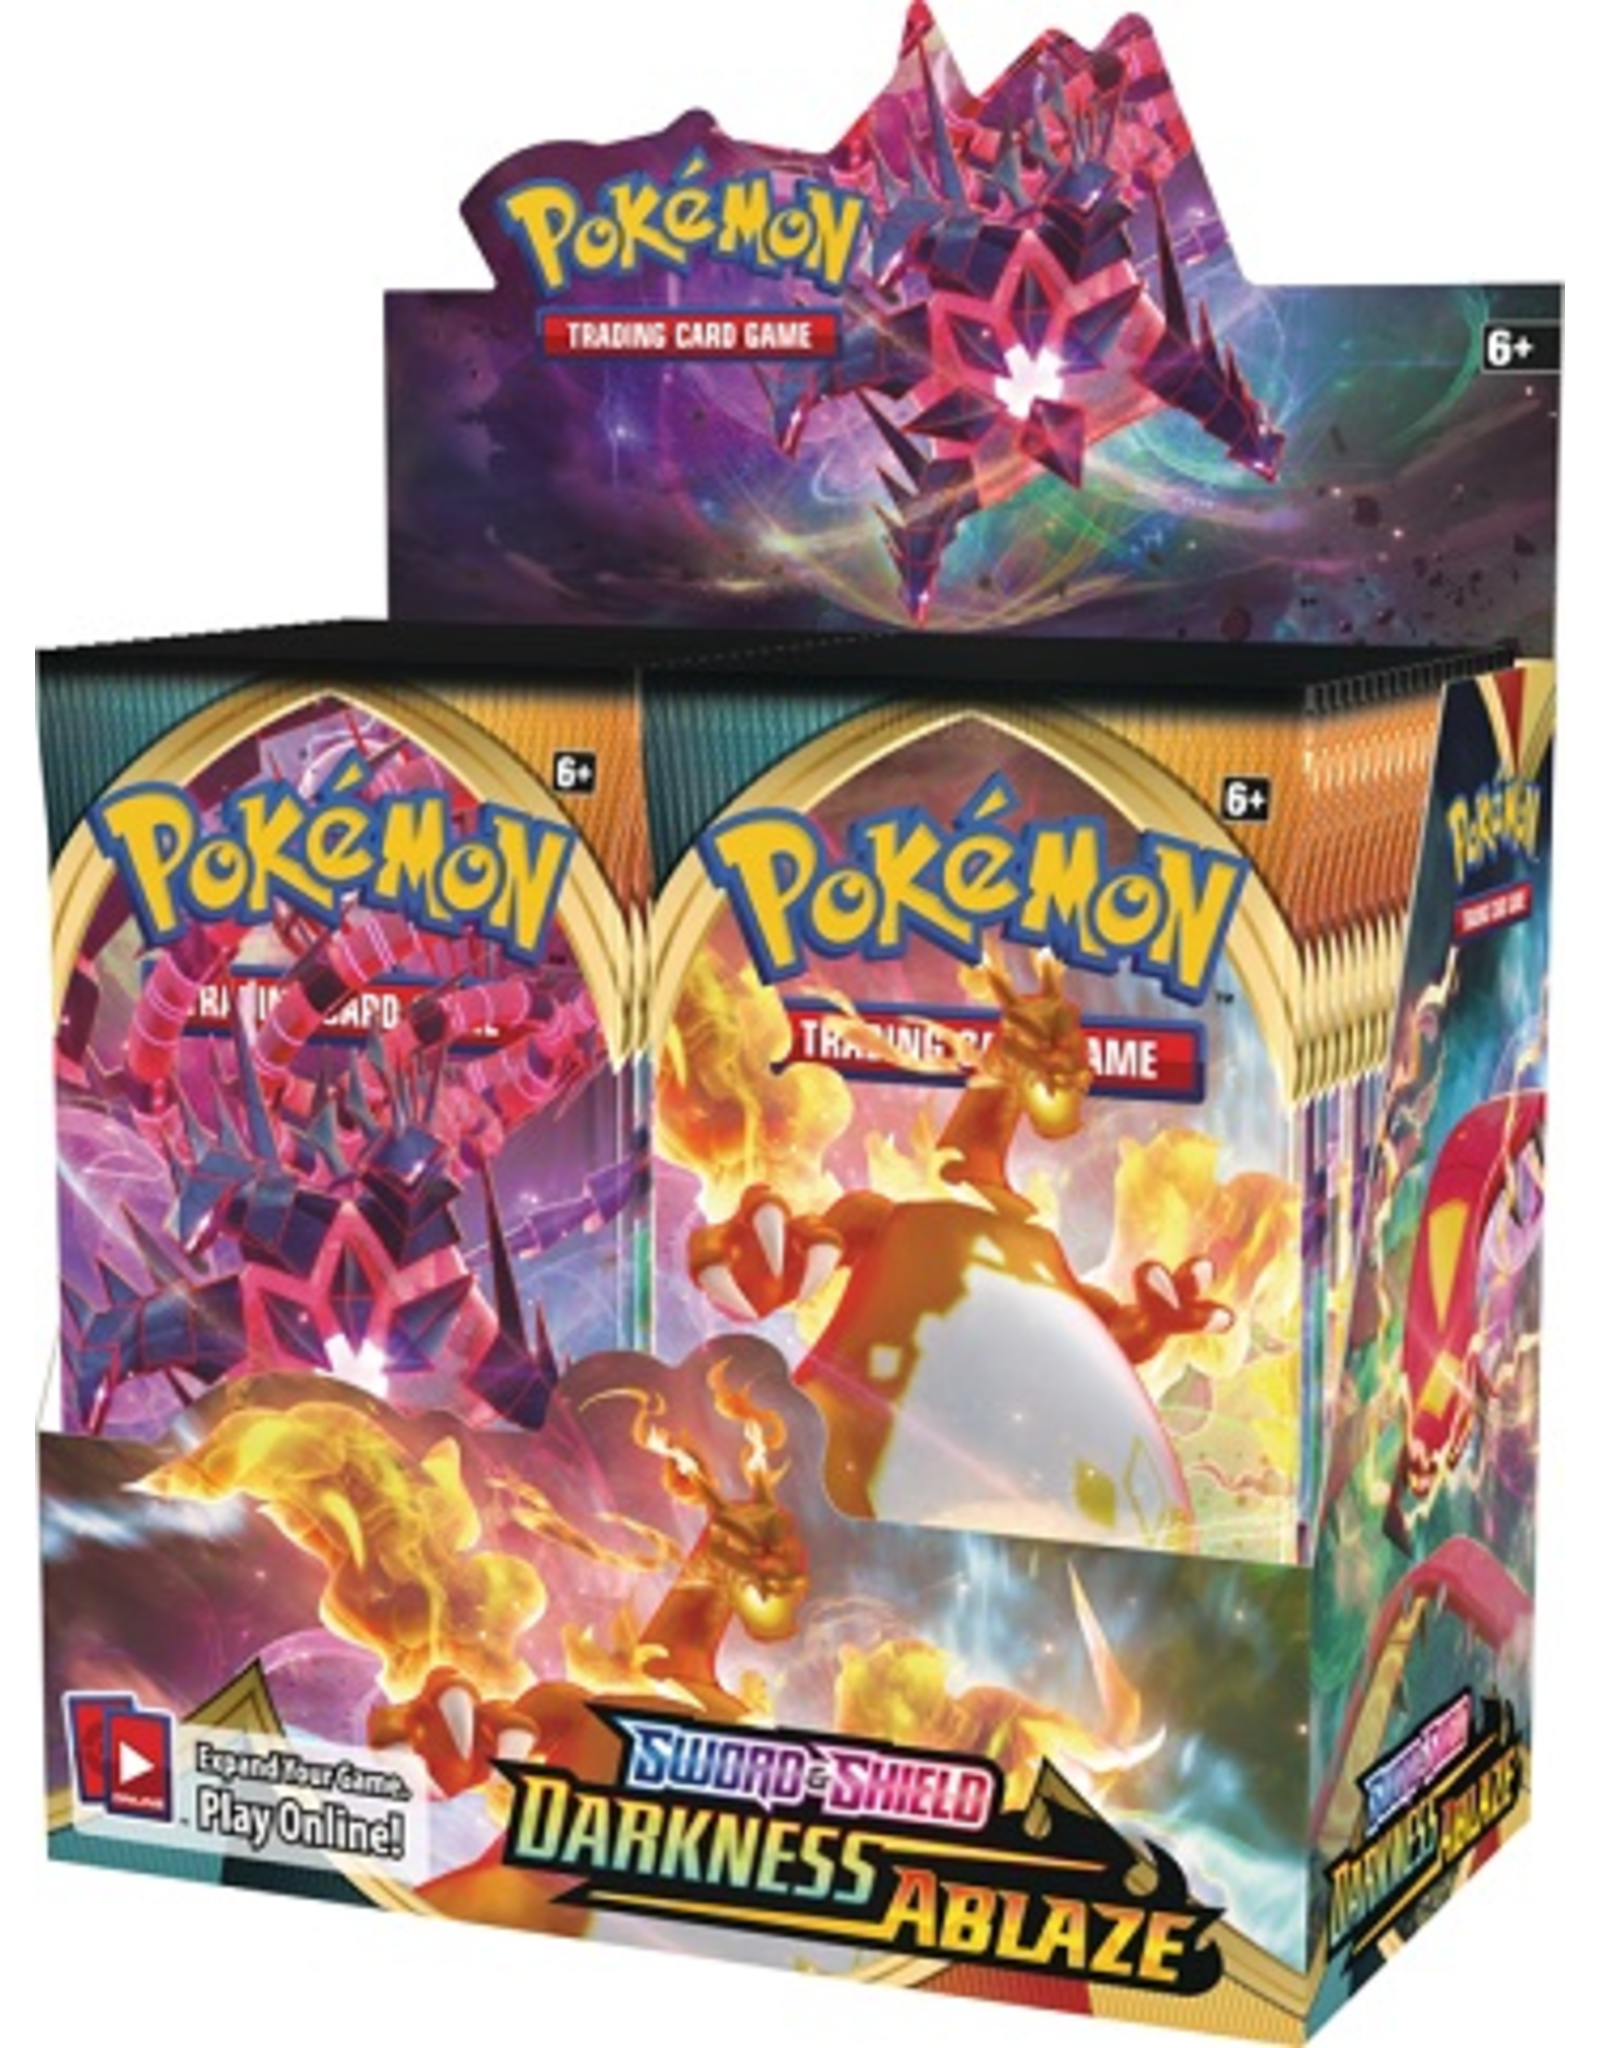 Pokemon Company Pokemon Trading Card Game - Darkness Ablaze Booster Pack (10 cards)